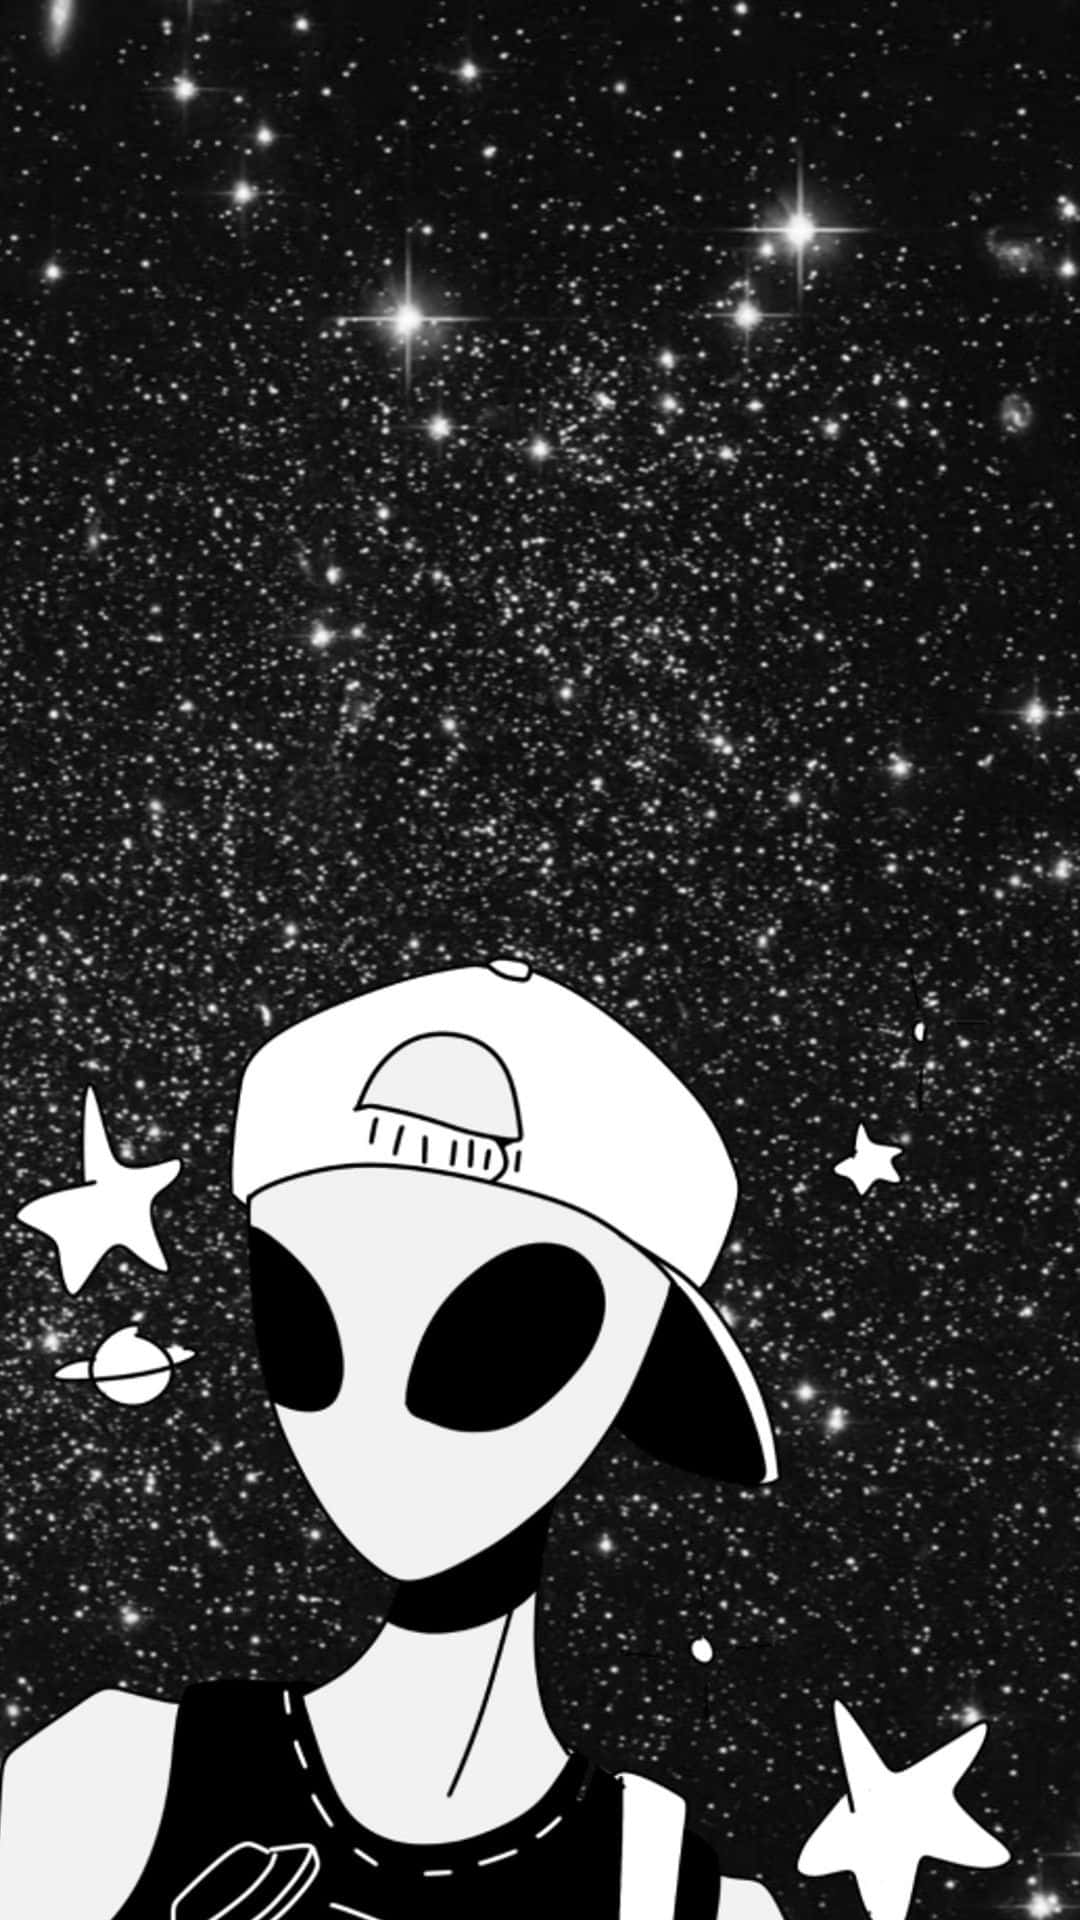 An Alien In A Cap And Hat With Stars In The Background Wallpaper